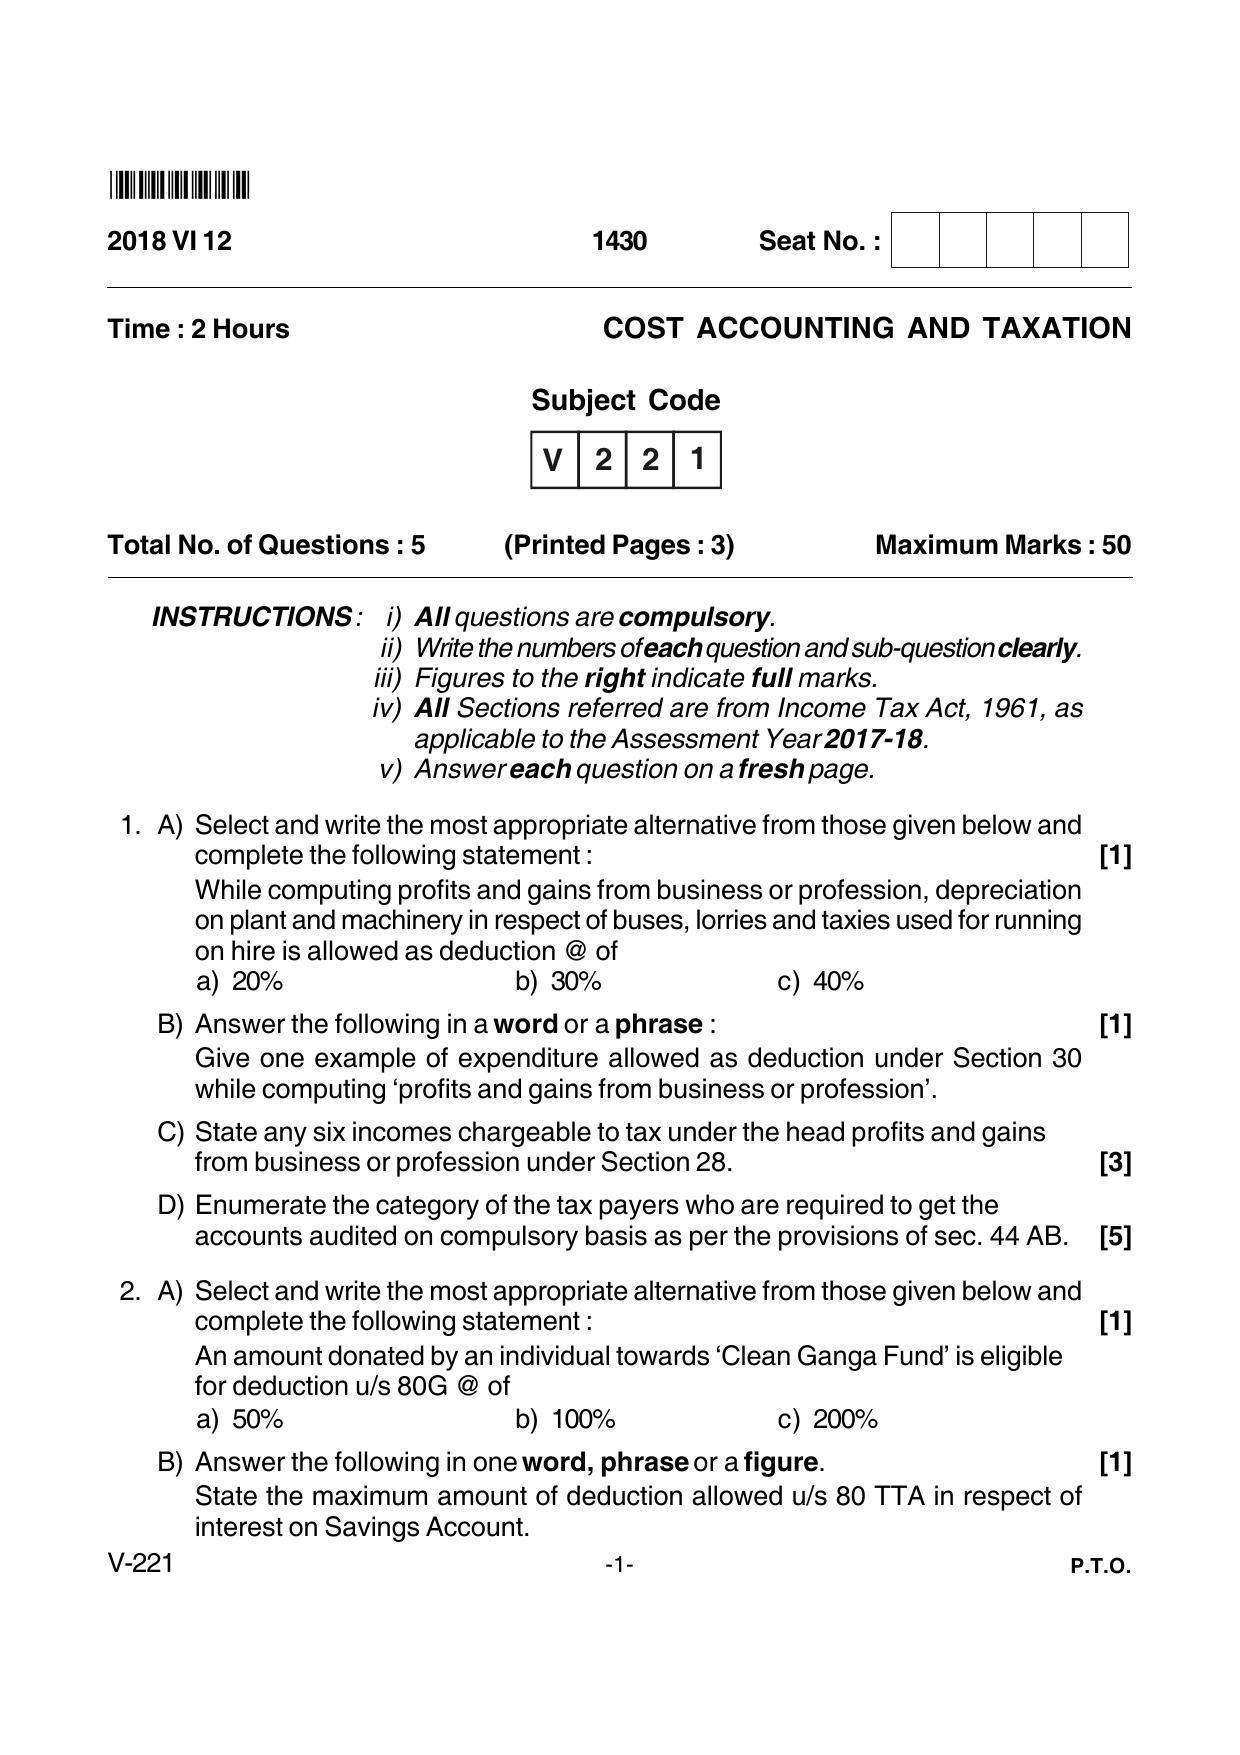 Goa Board Class 12 Cost Accounting & Taxation  Voc 221 (June 2018) Question Paper - Page 1